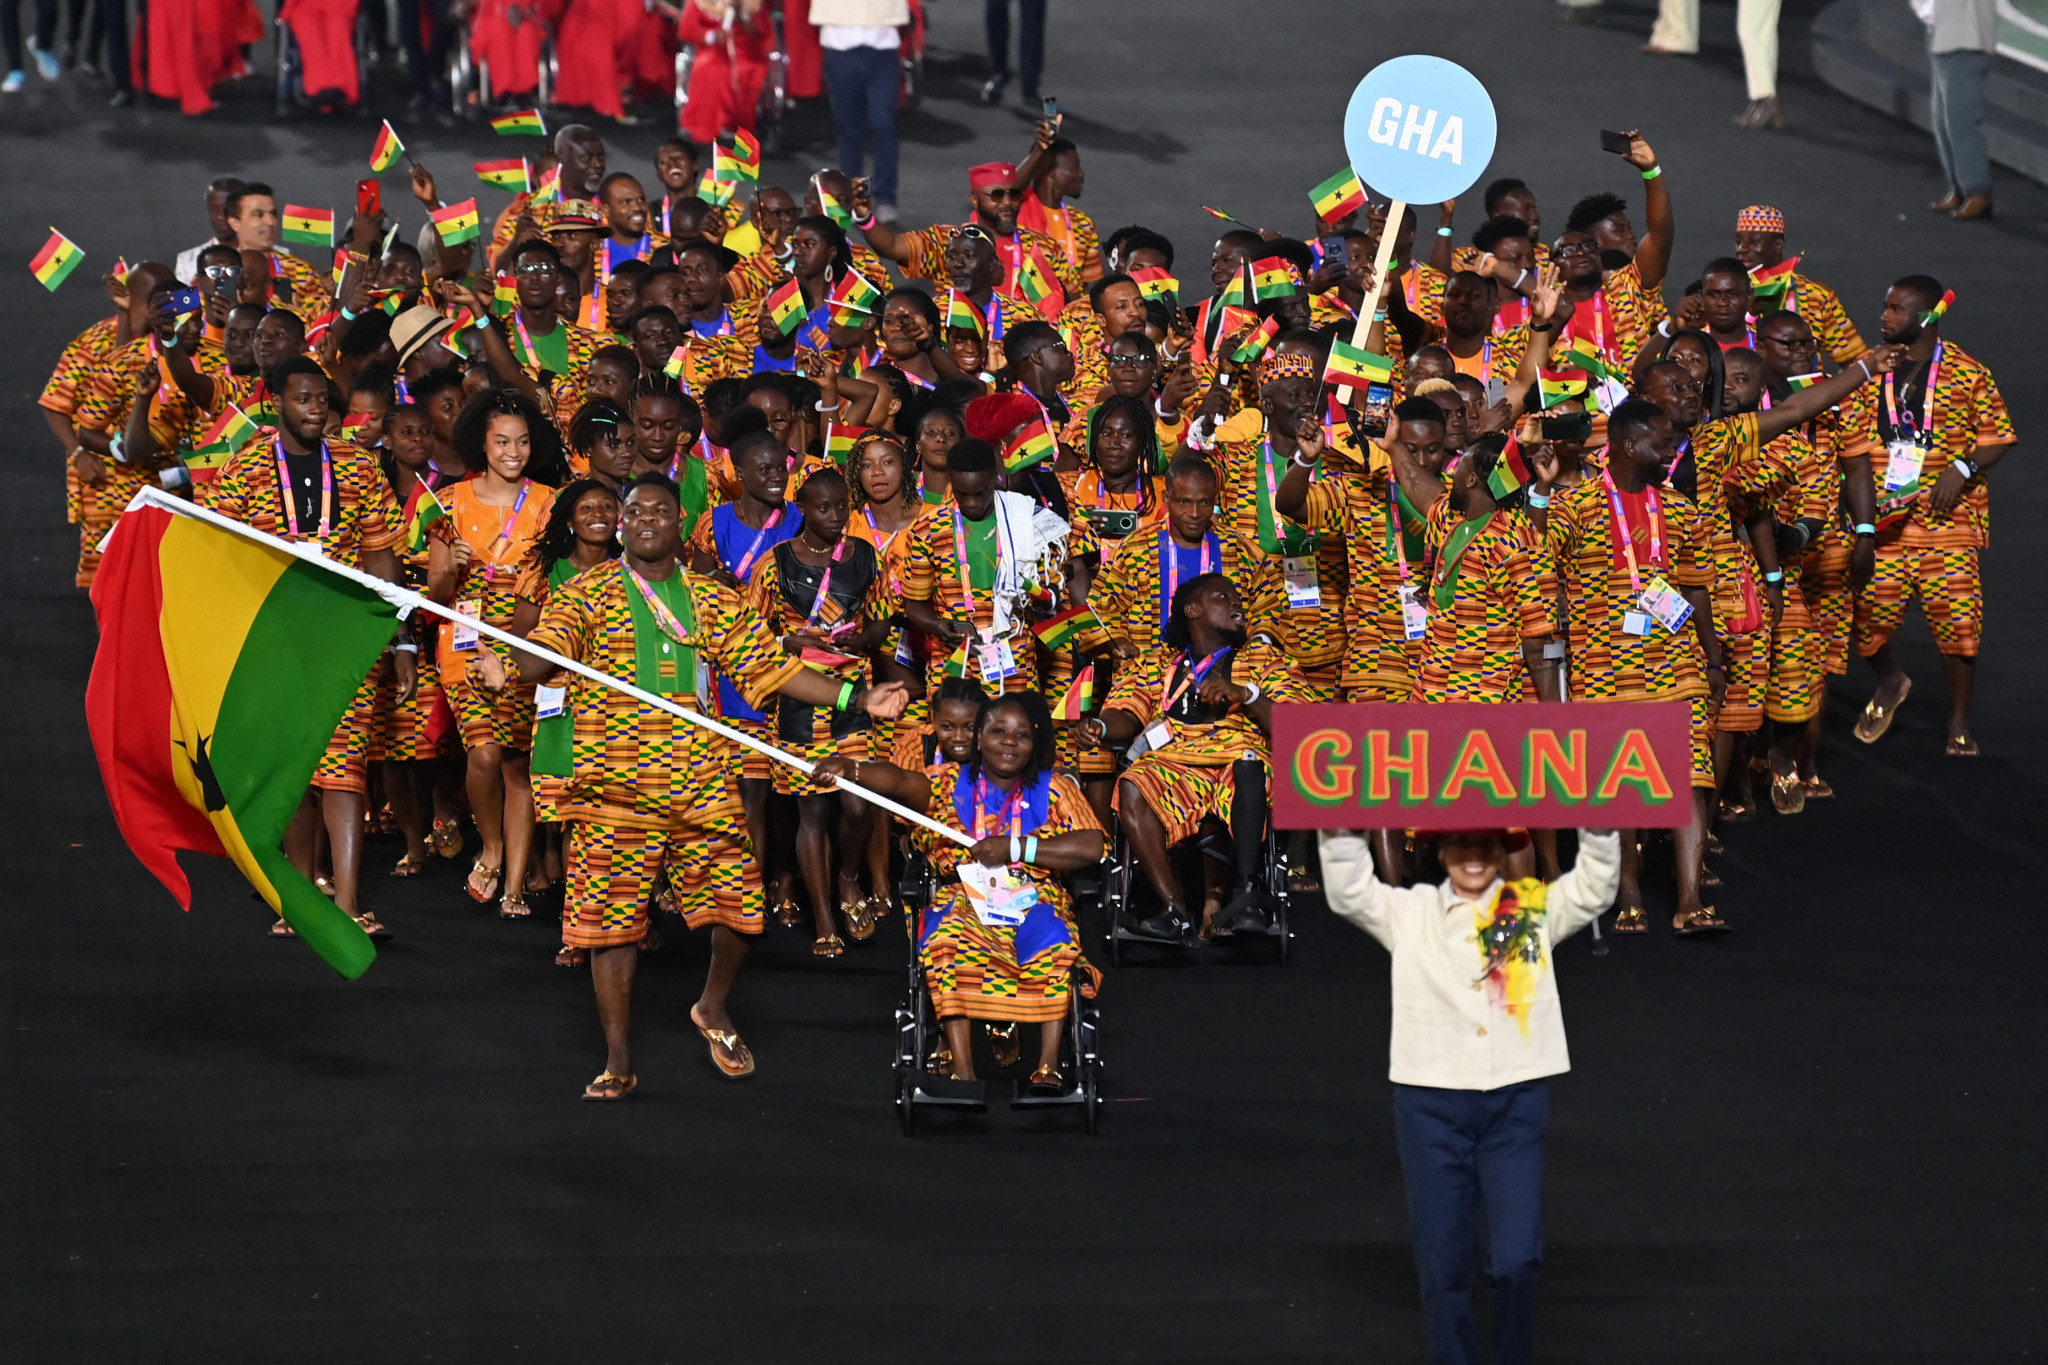 Accra 2023 official claims African Games will be "blessing" for Ghanaian athletes